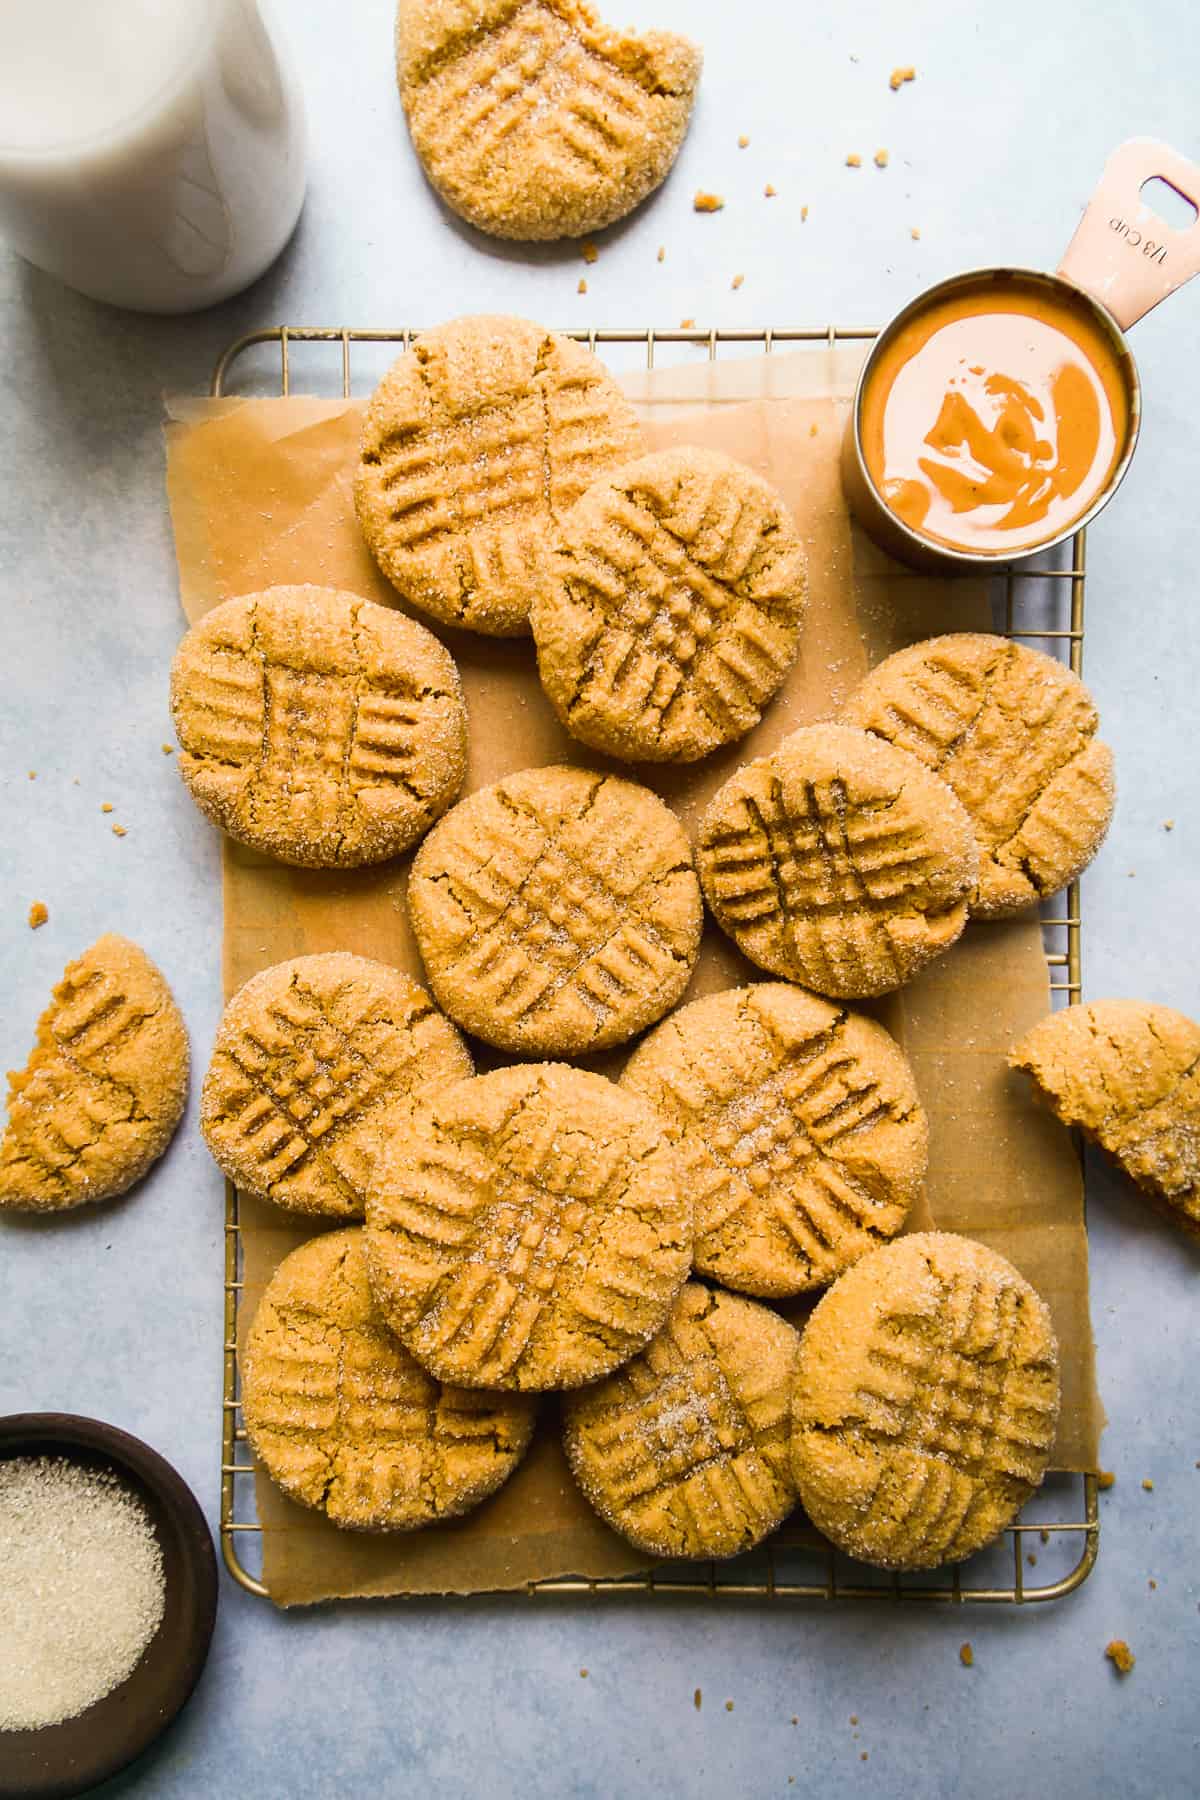 Peanut butter almond flour cookies spread out on a wire rack.